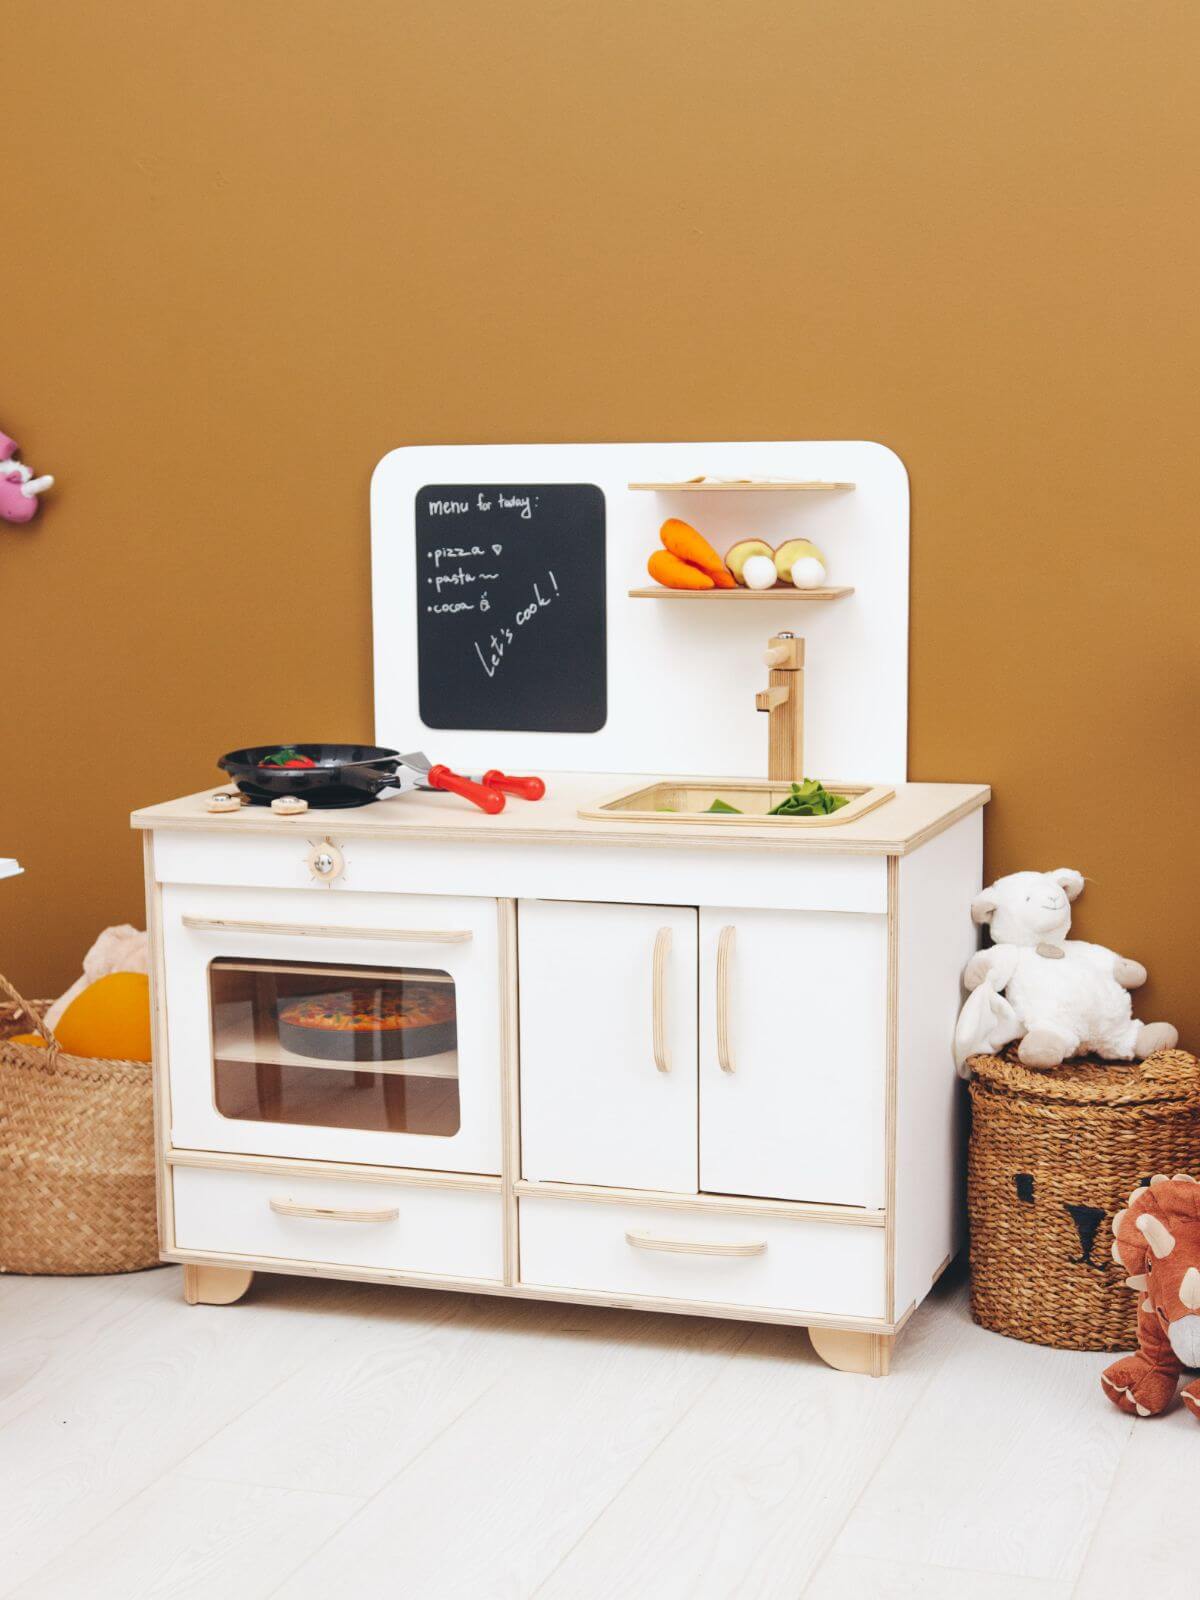 play toy kitchen for baby 